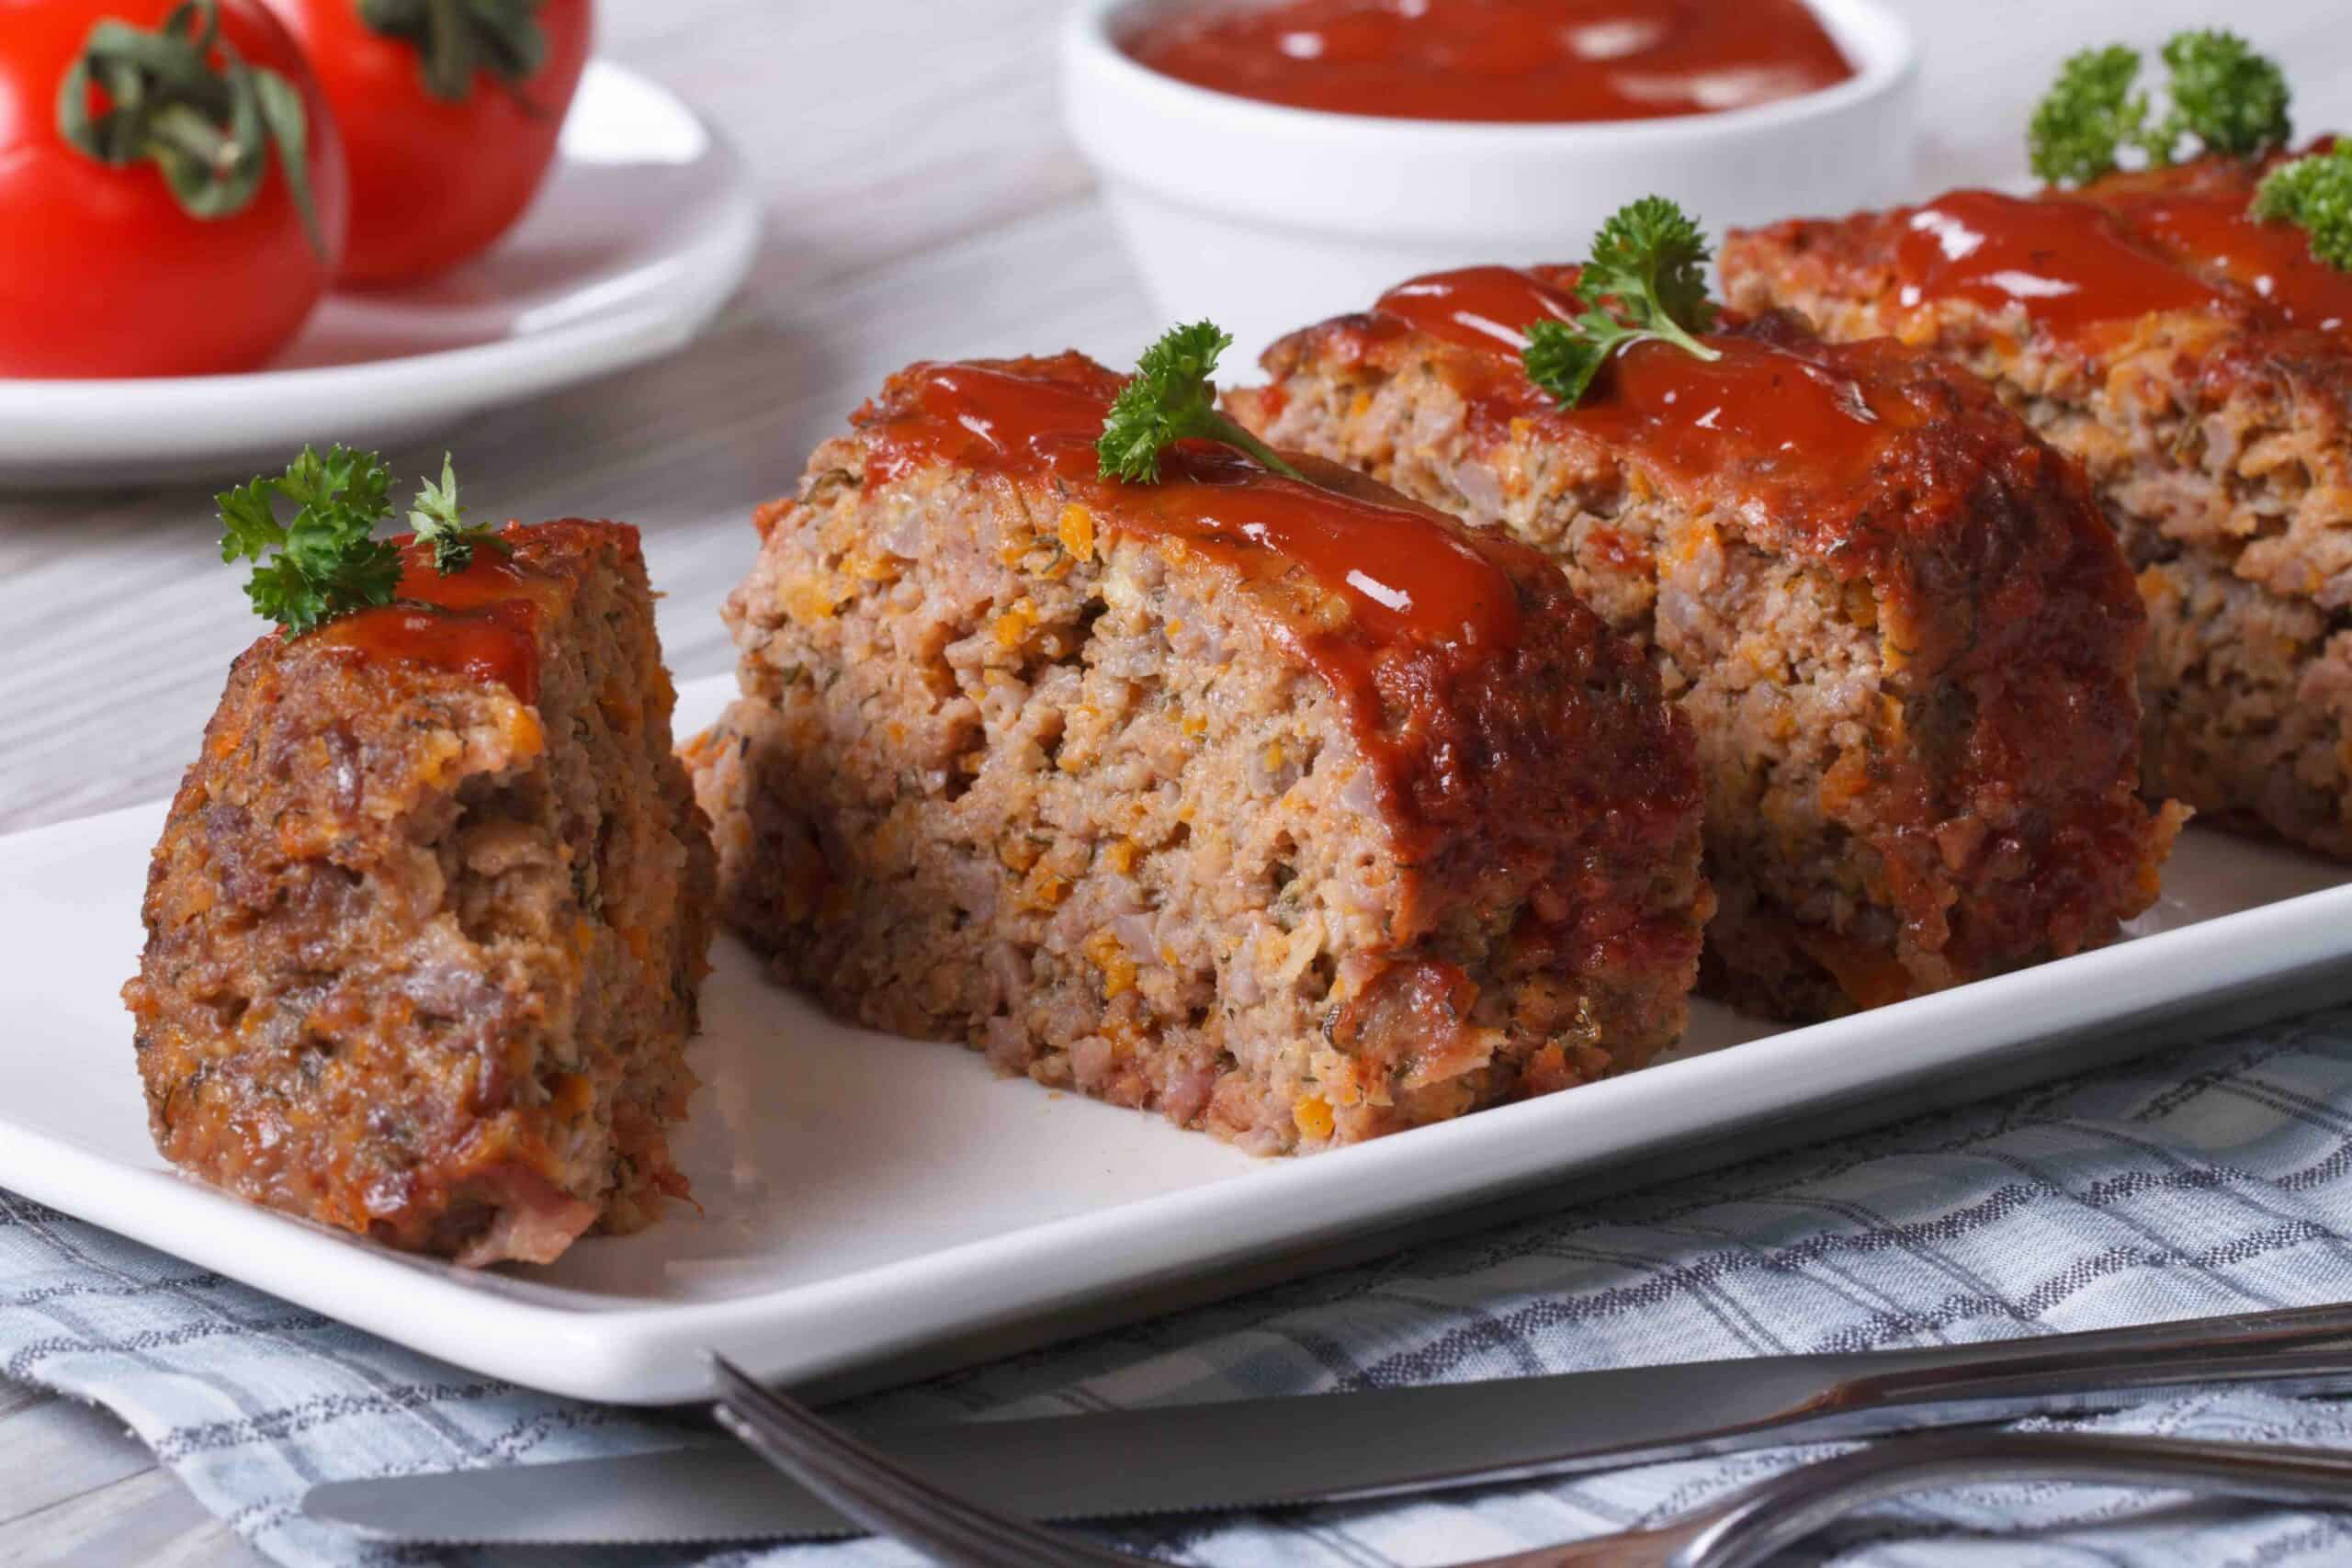 Sliced meat loaf with ketchup and parsley close-up on a plate, horizontal